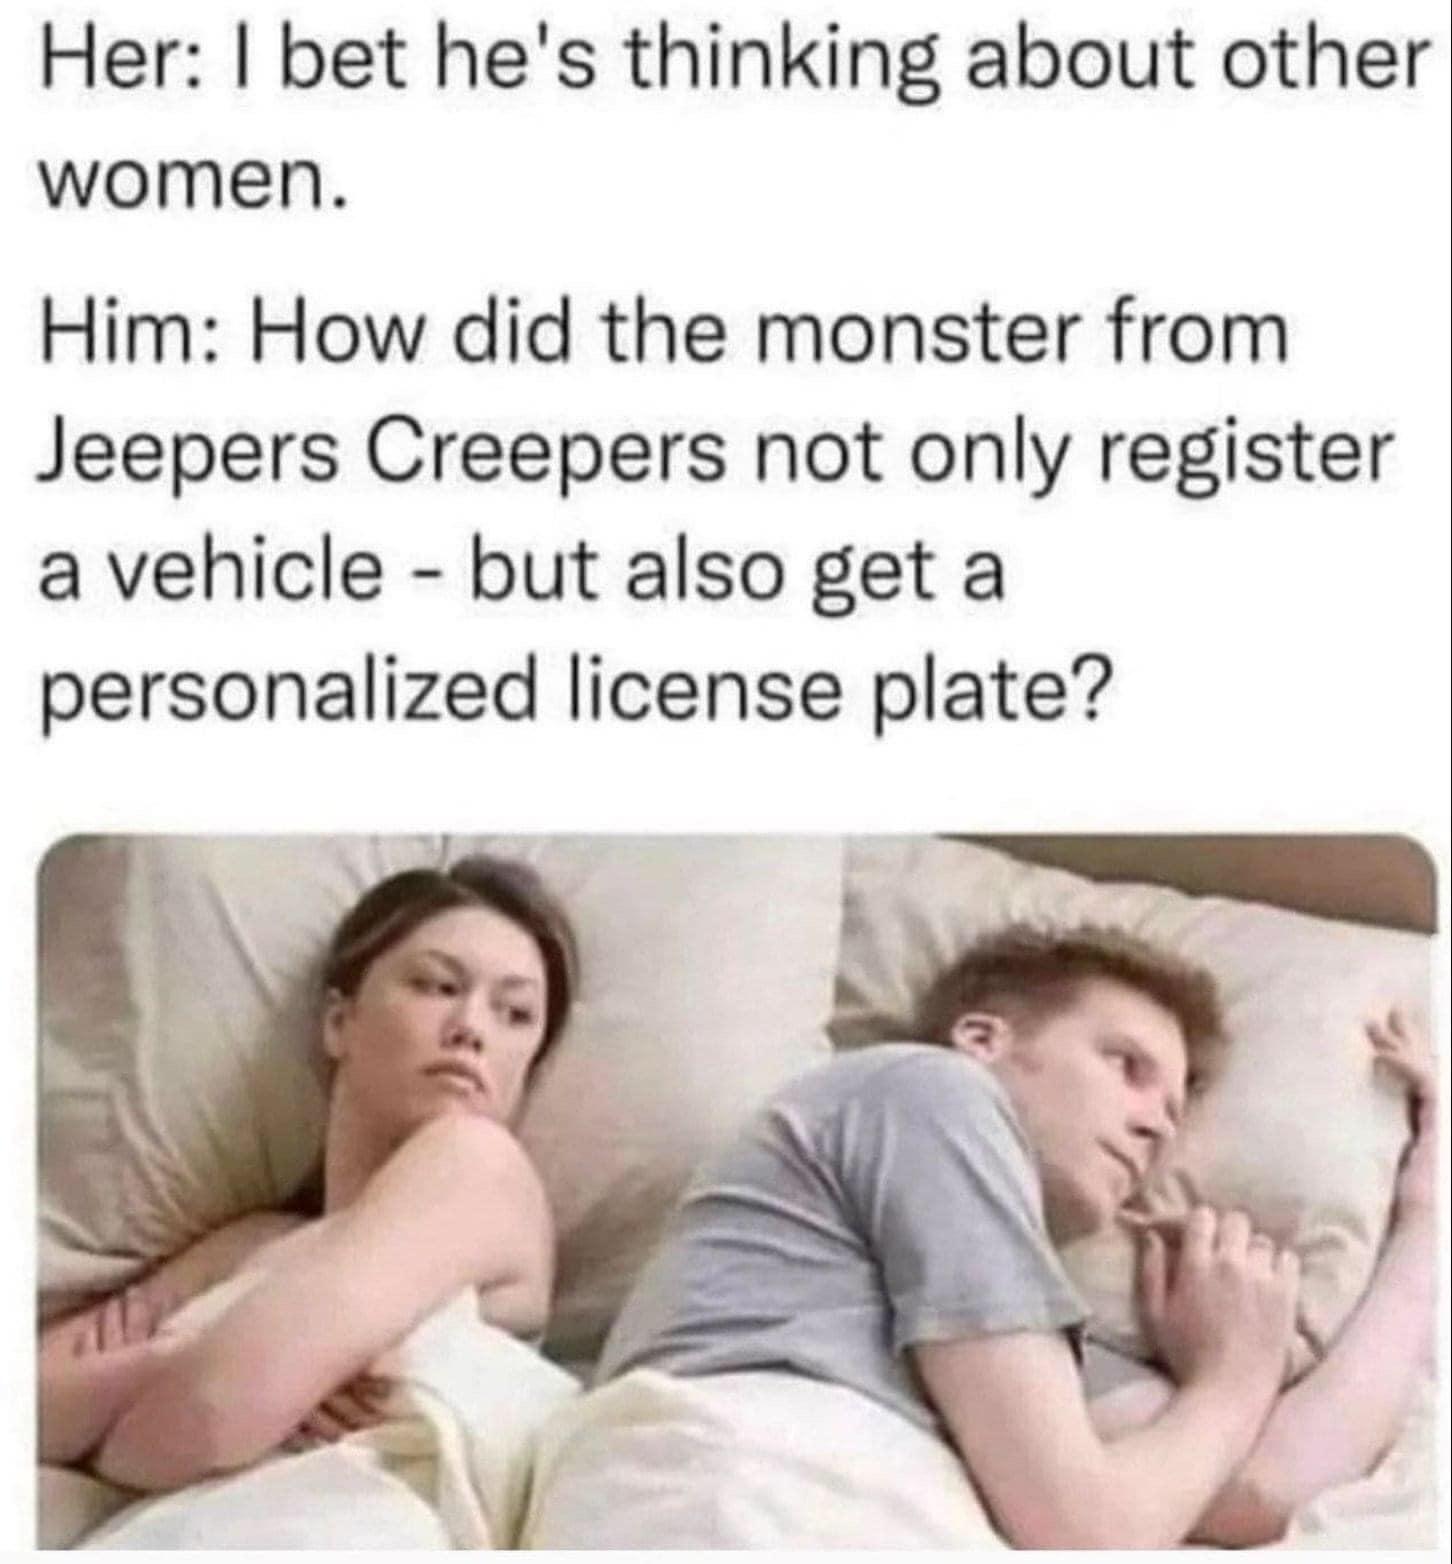 funny tweets memes and pics - friendship - Her I bet he's thinking about other women. Him How did the monster from Jeepers Creepers not only register a vehicle but also get a personalized license plate?